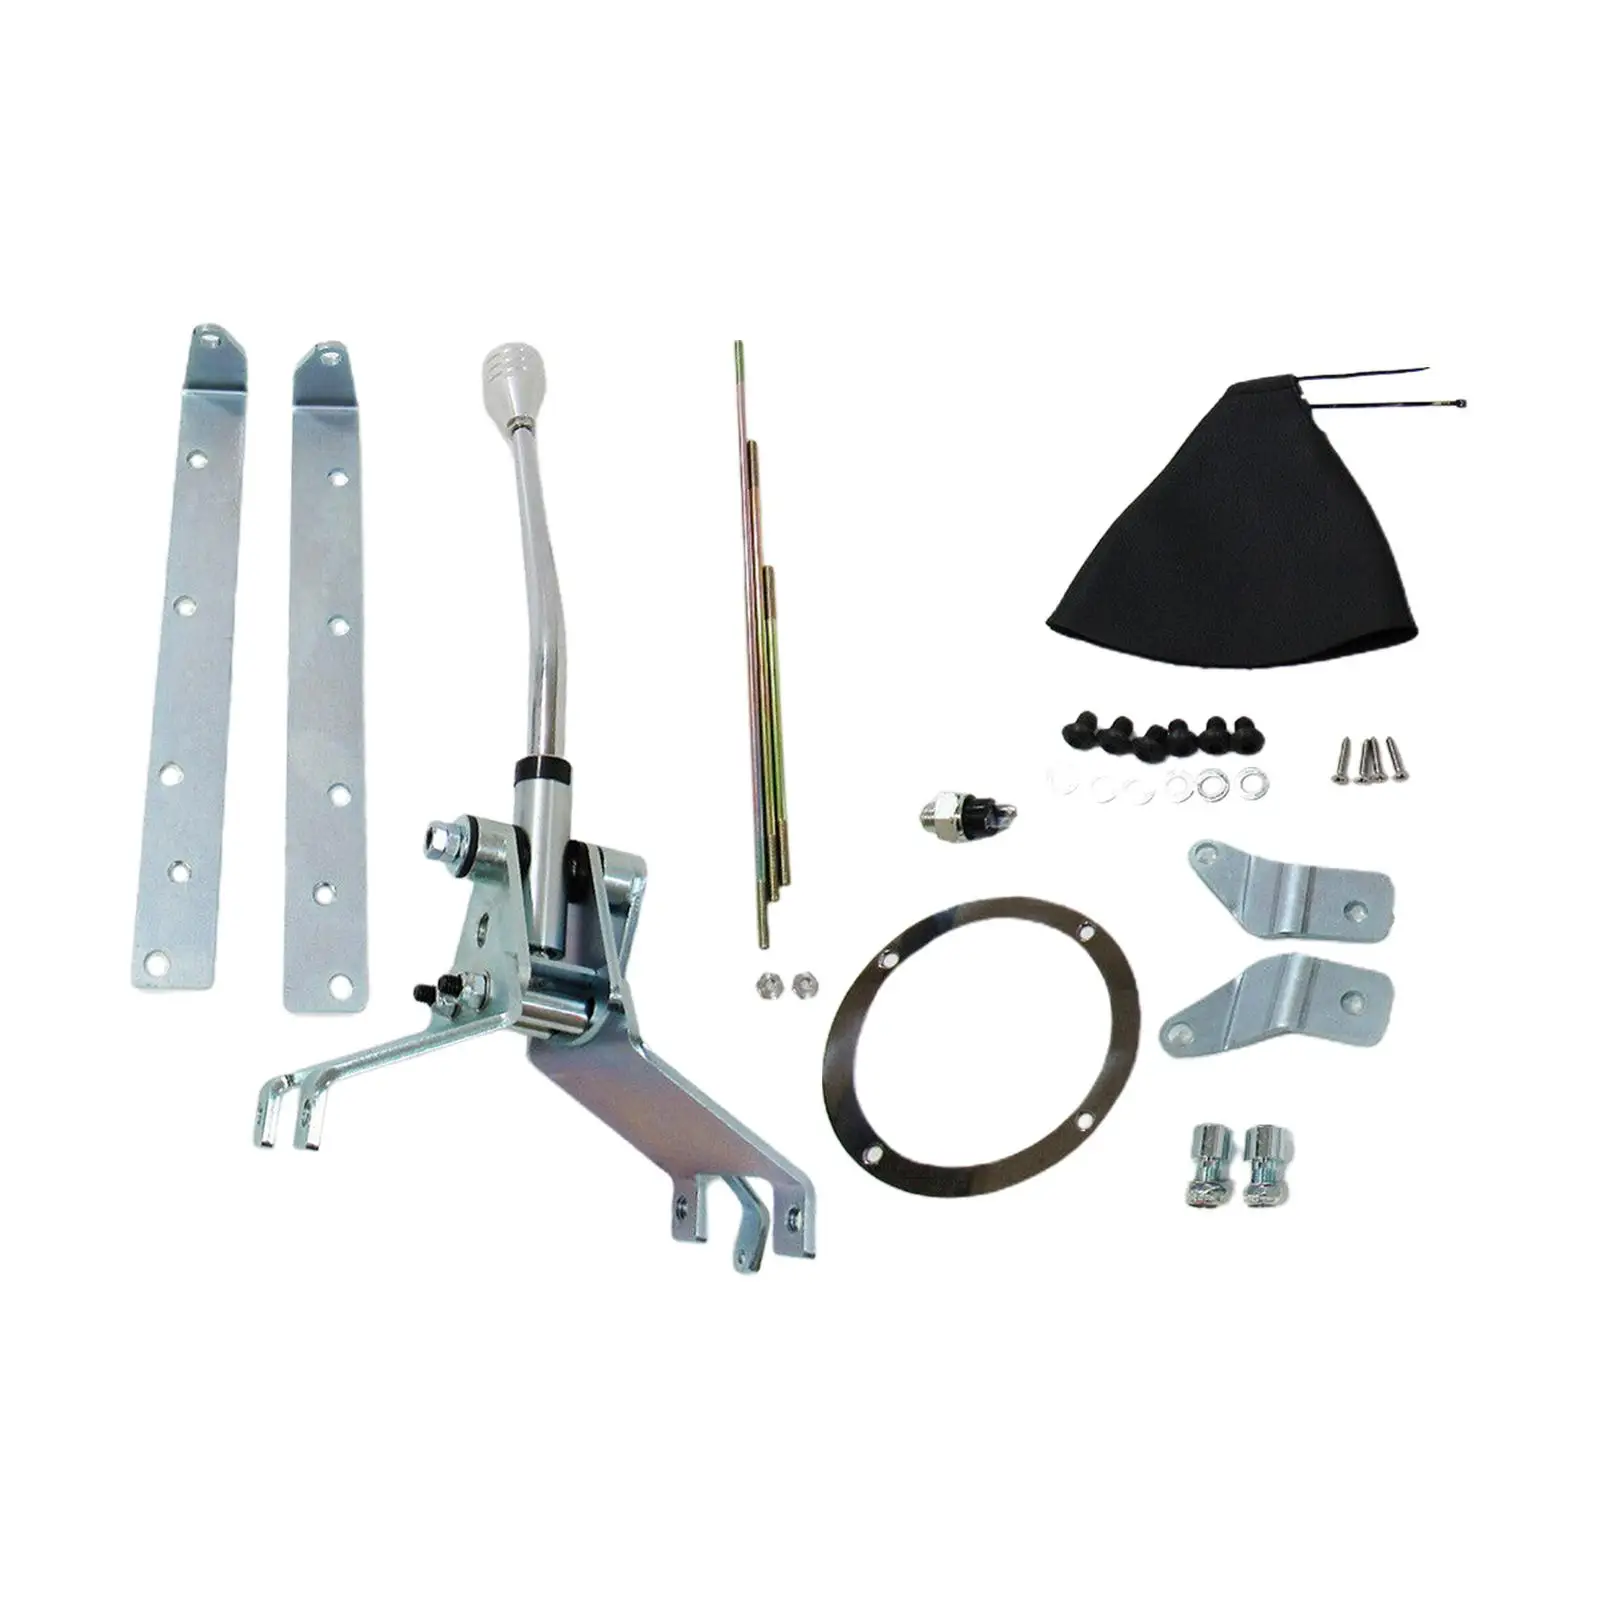 

12" Automatic Shifter Kit HRC12-940 Easy Installation Transmission Shifter for GM Turbo 350 TH350 Automotive Accessories